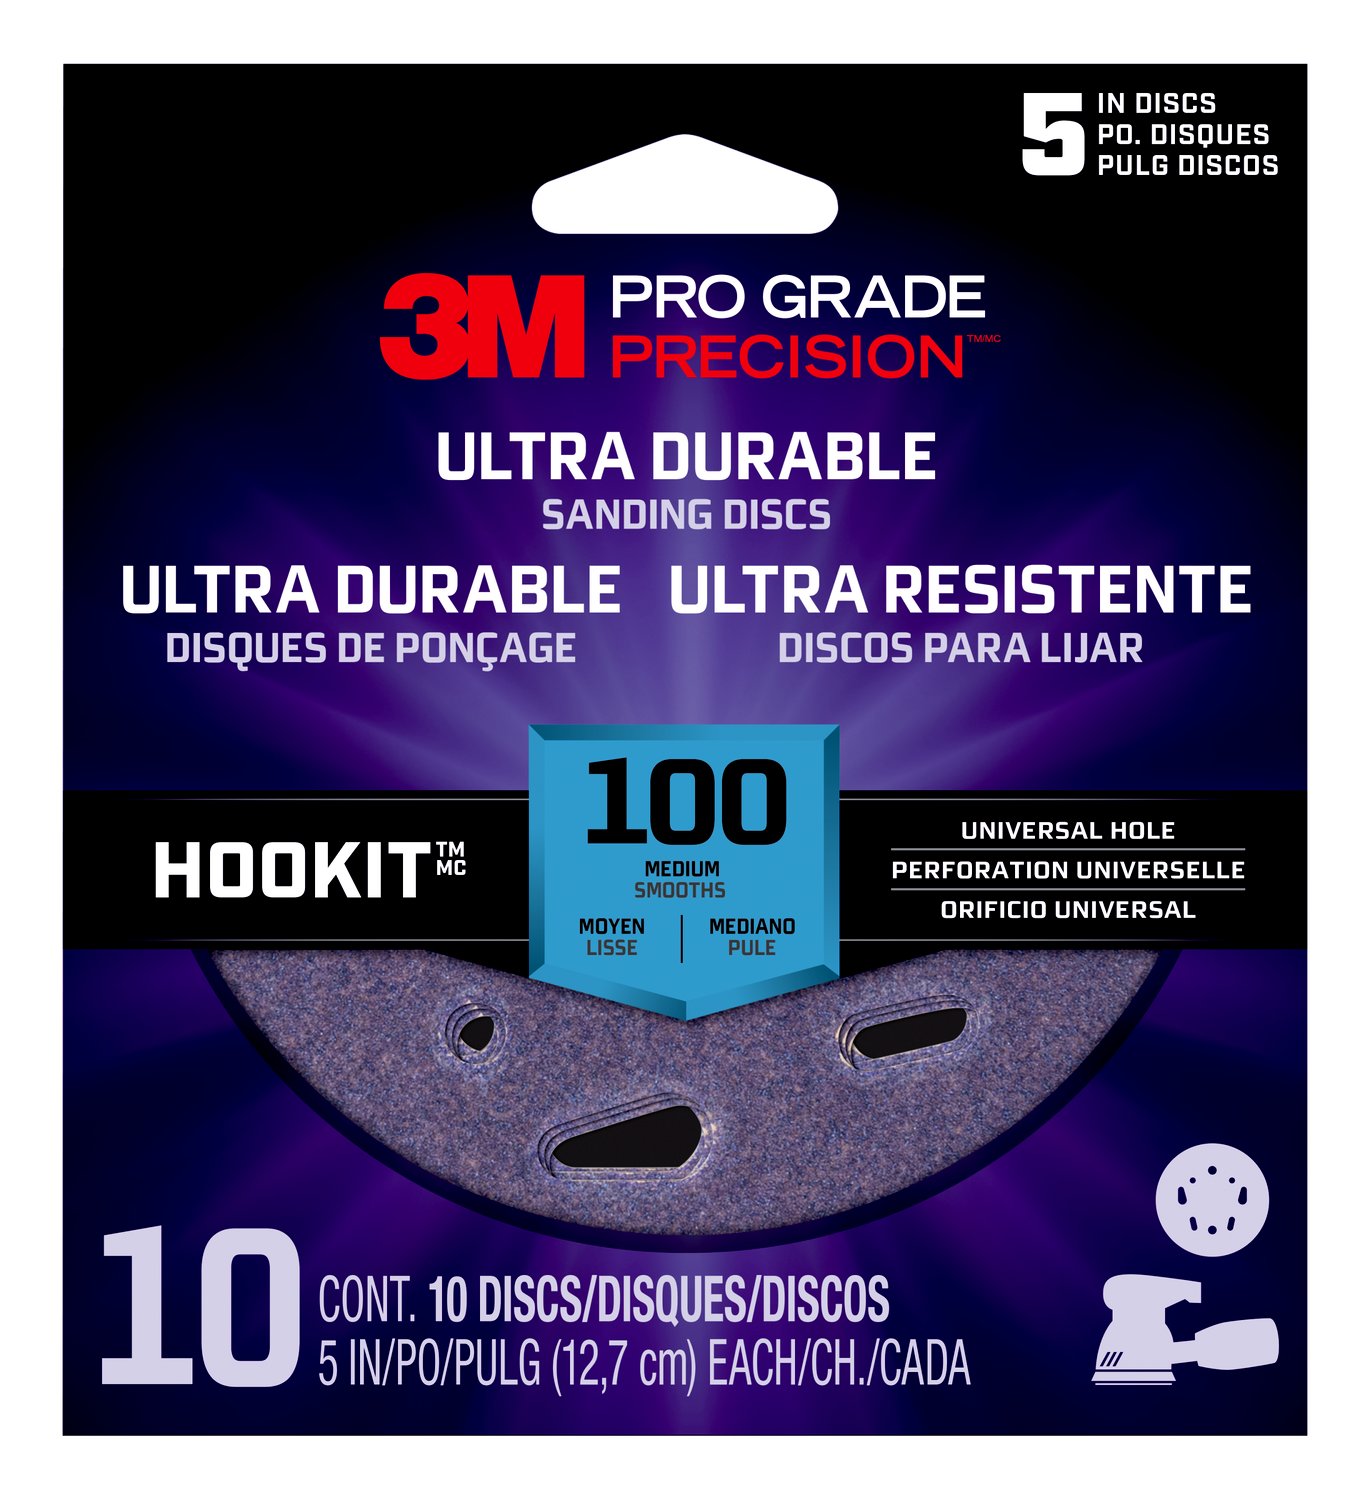 7100202876 - 3M Pro Grade Precision Ultra Durable Universal Hole Sanding Disc,
DUH5100TRI-10I, 5 inch UH, 100, 10/pack